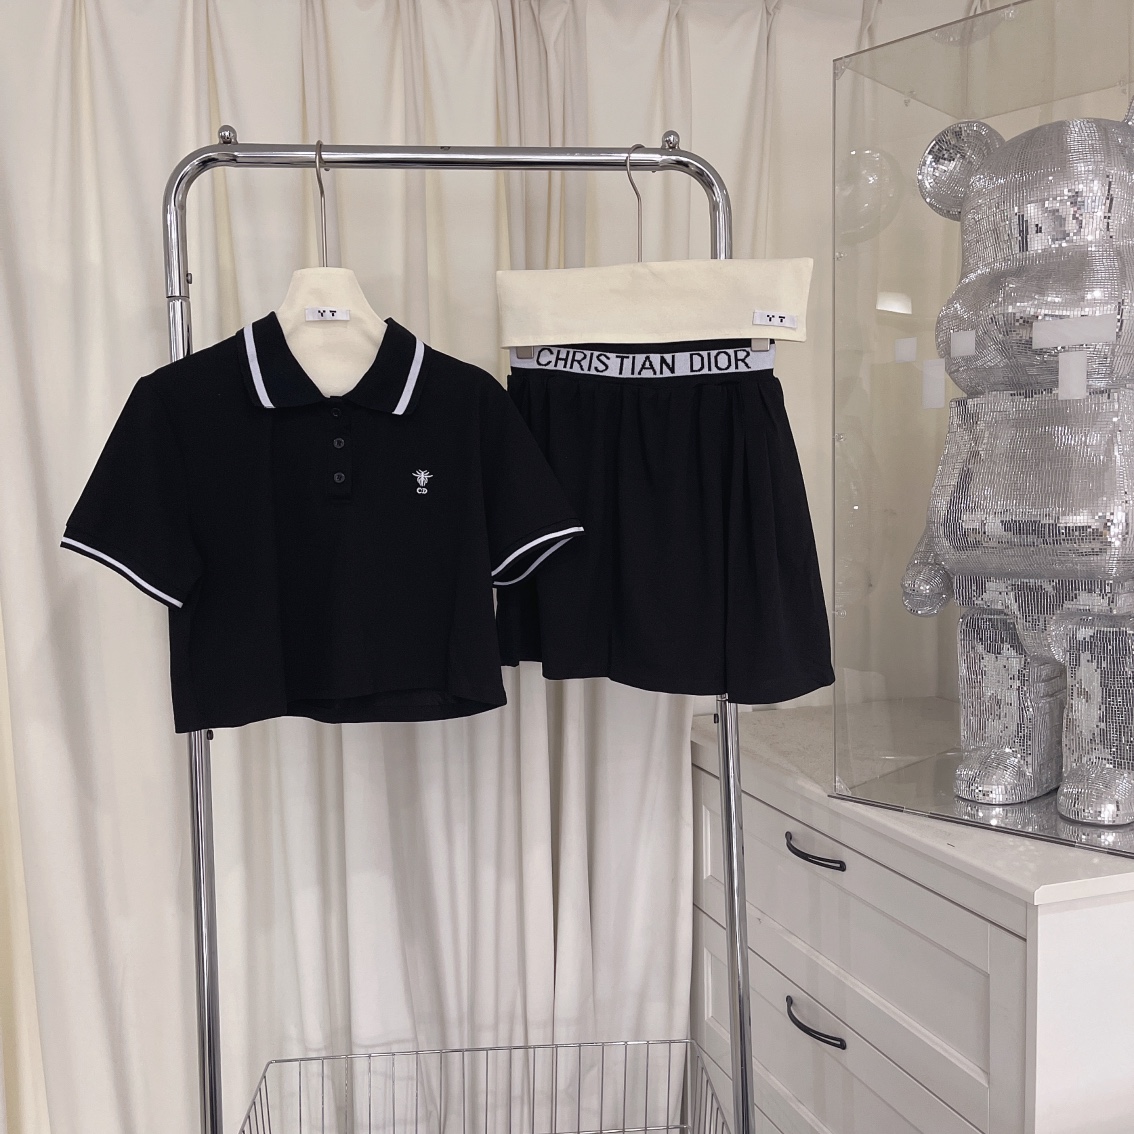 Dior Clothing Polo Shirts & Blouses Skirts Good Quality Replica
 Black White Summer Collection